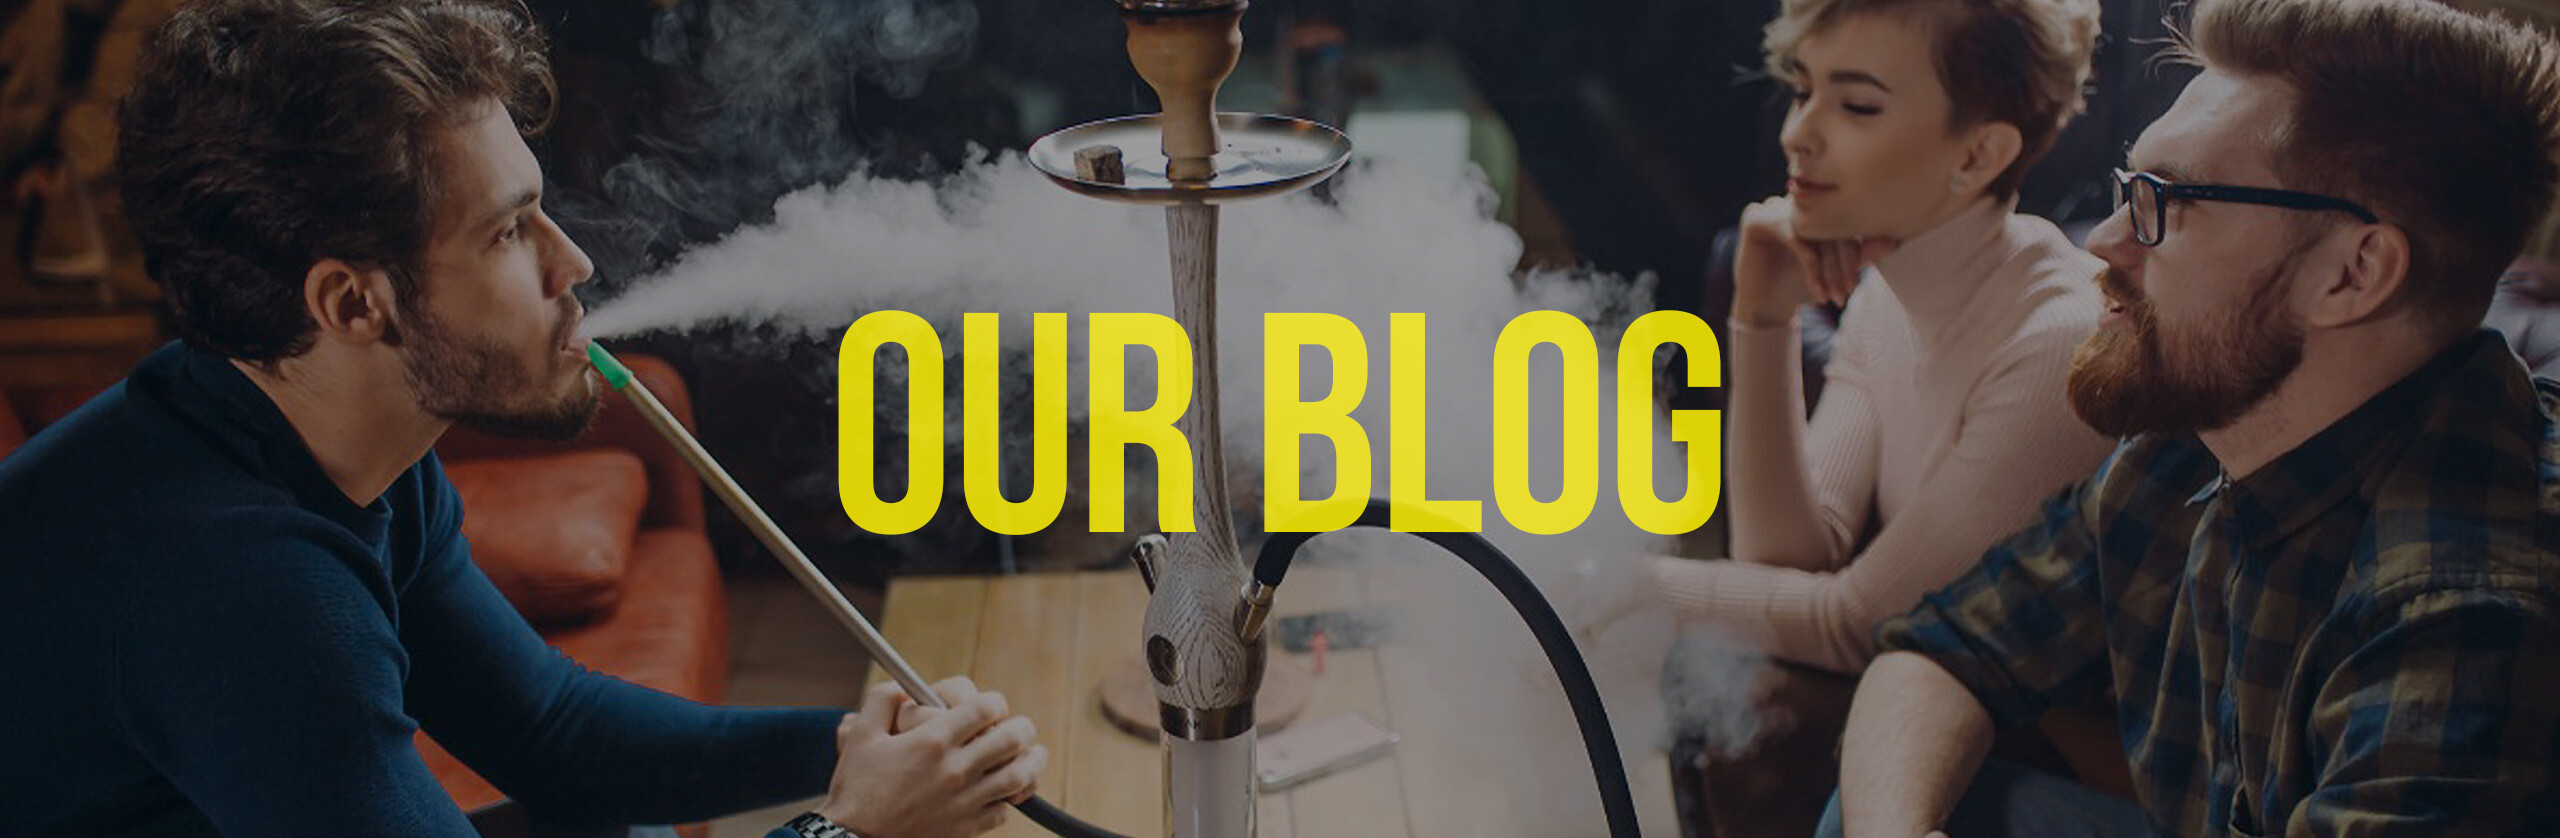 Save your flavor and witness the technological advancements of smoking hookah